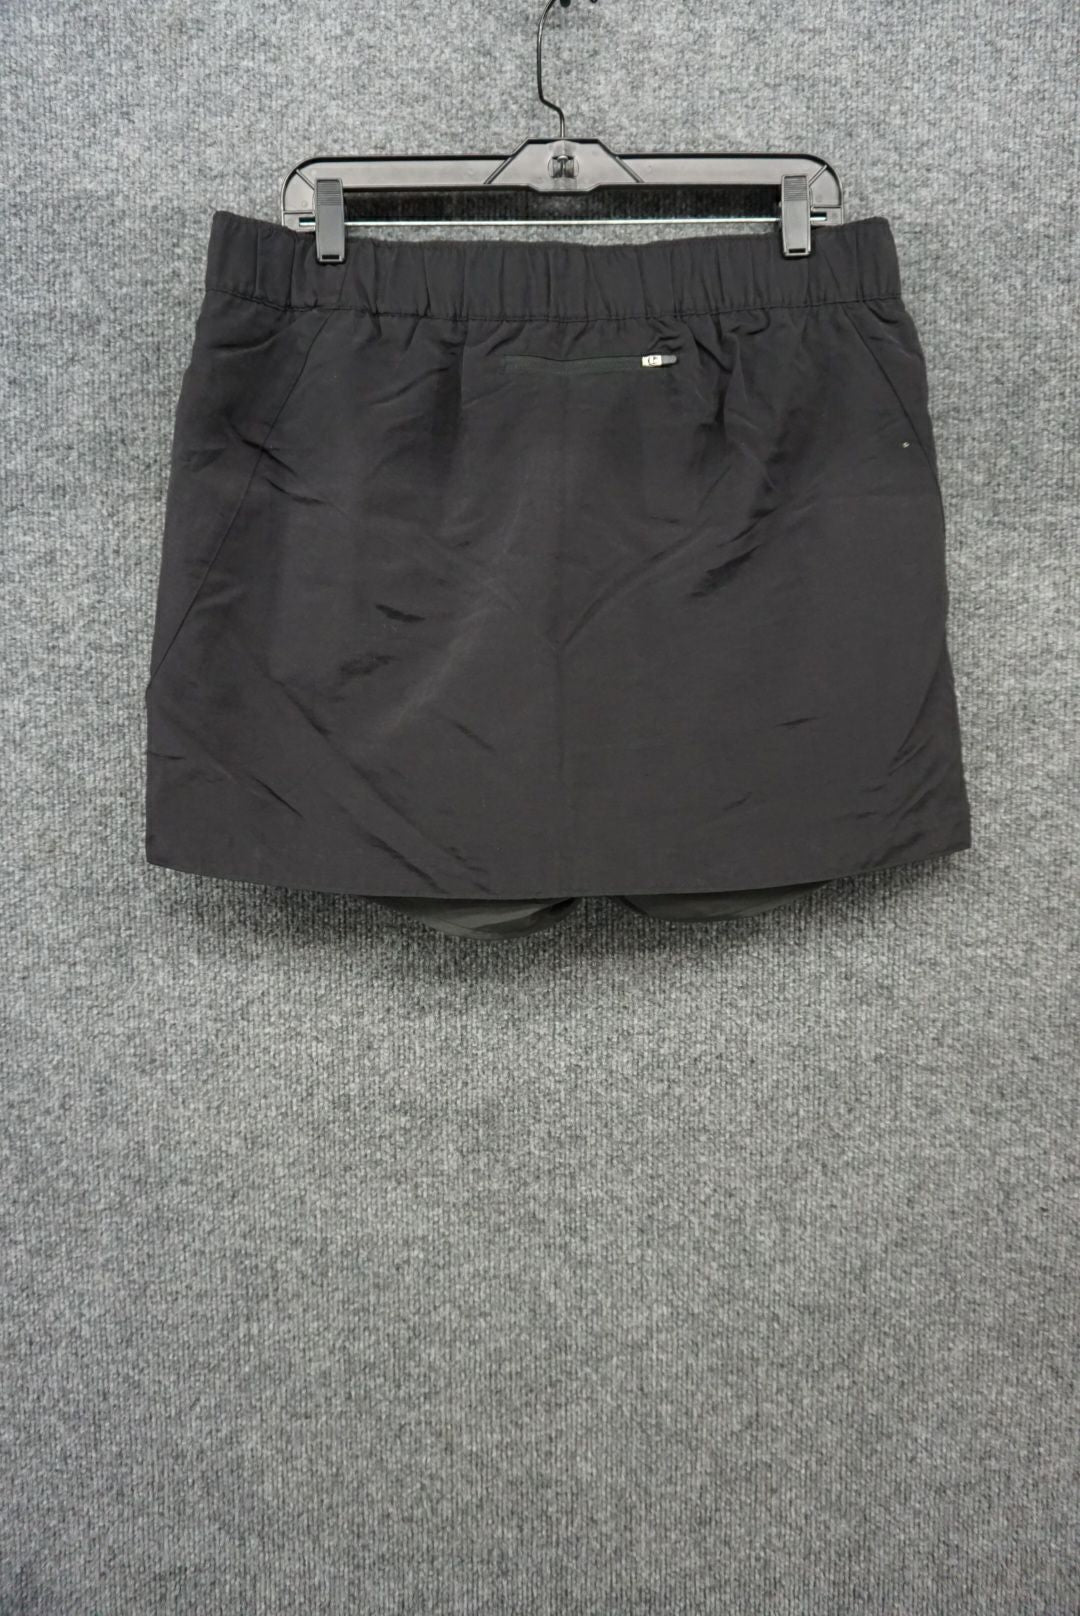 The North Face Black Size W Large Women's Skirt